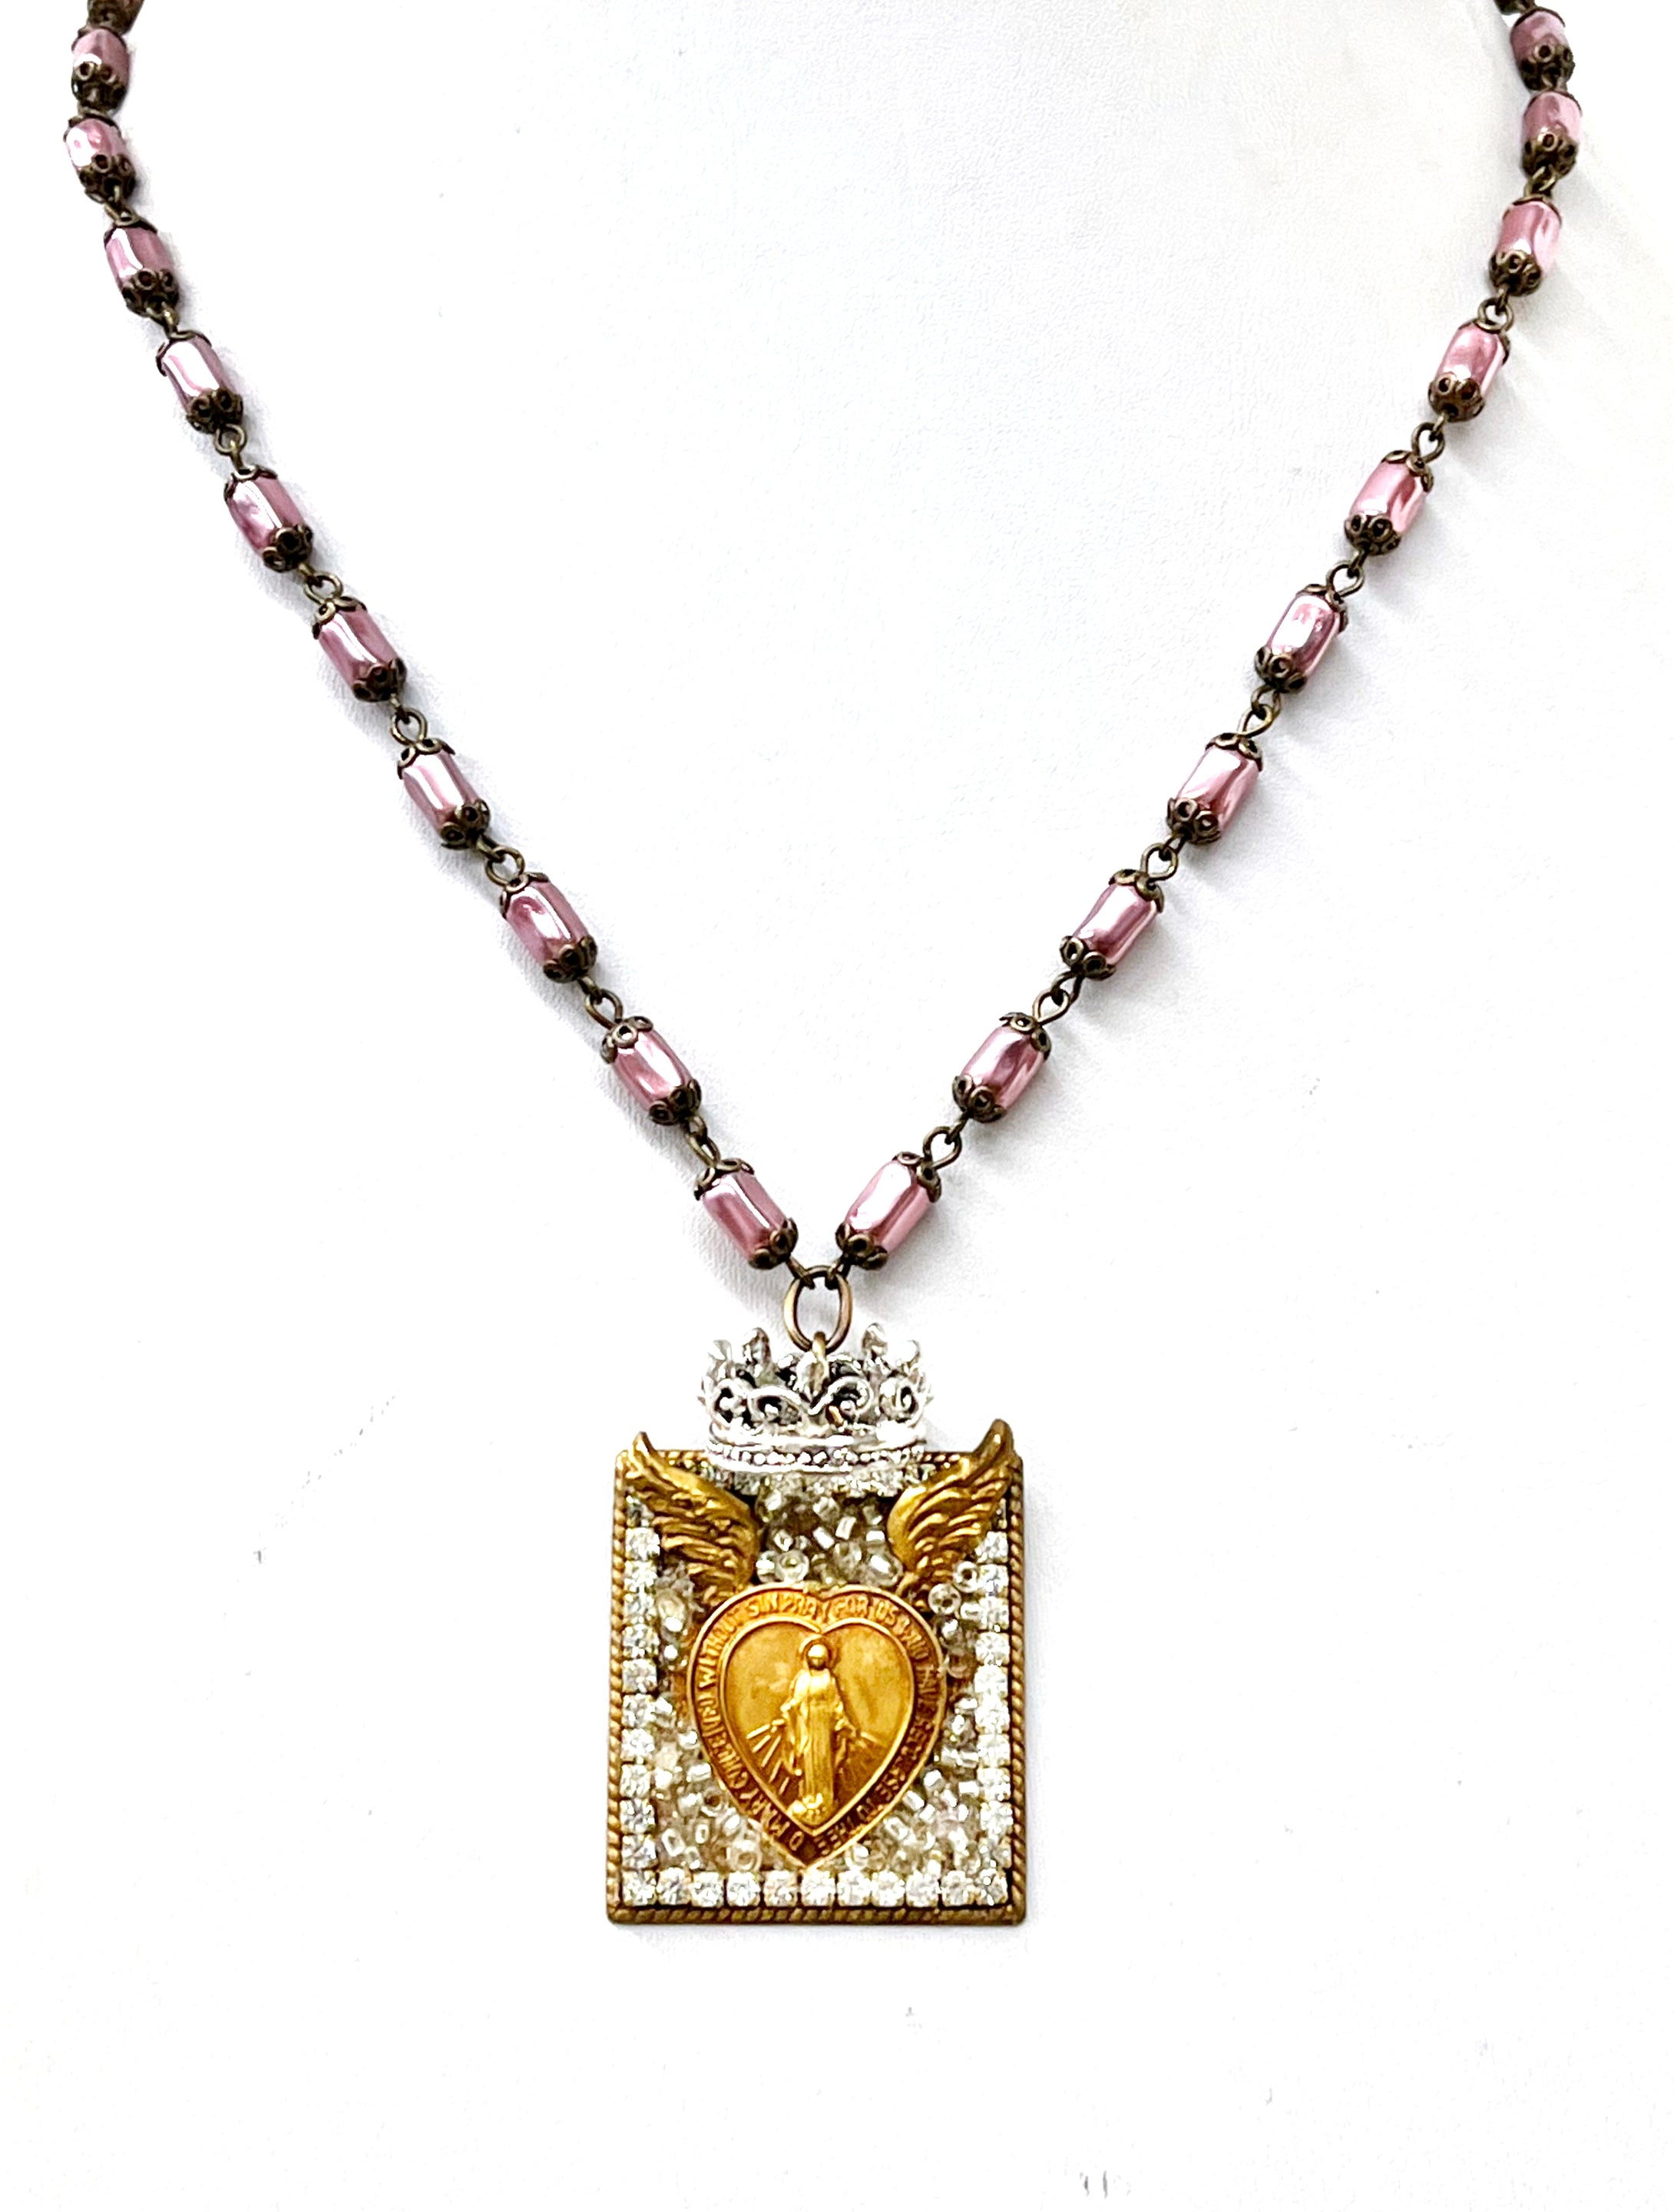 Winged Jeweled Madonna Necklace